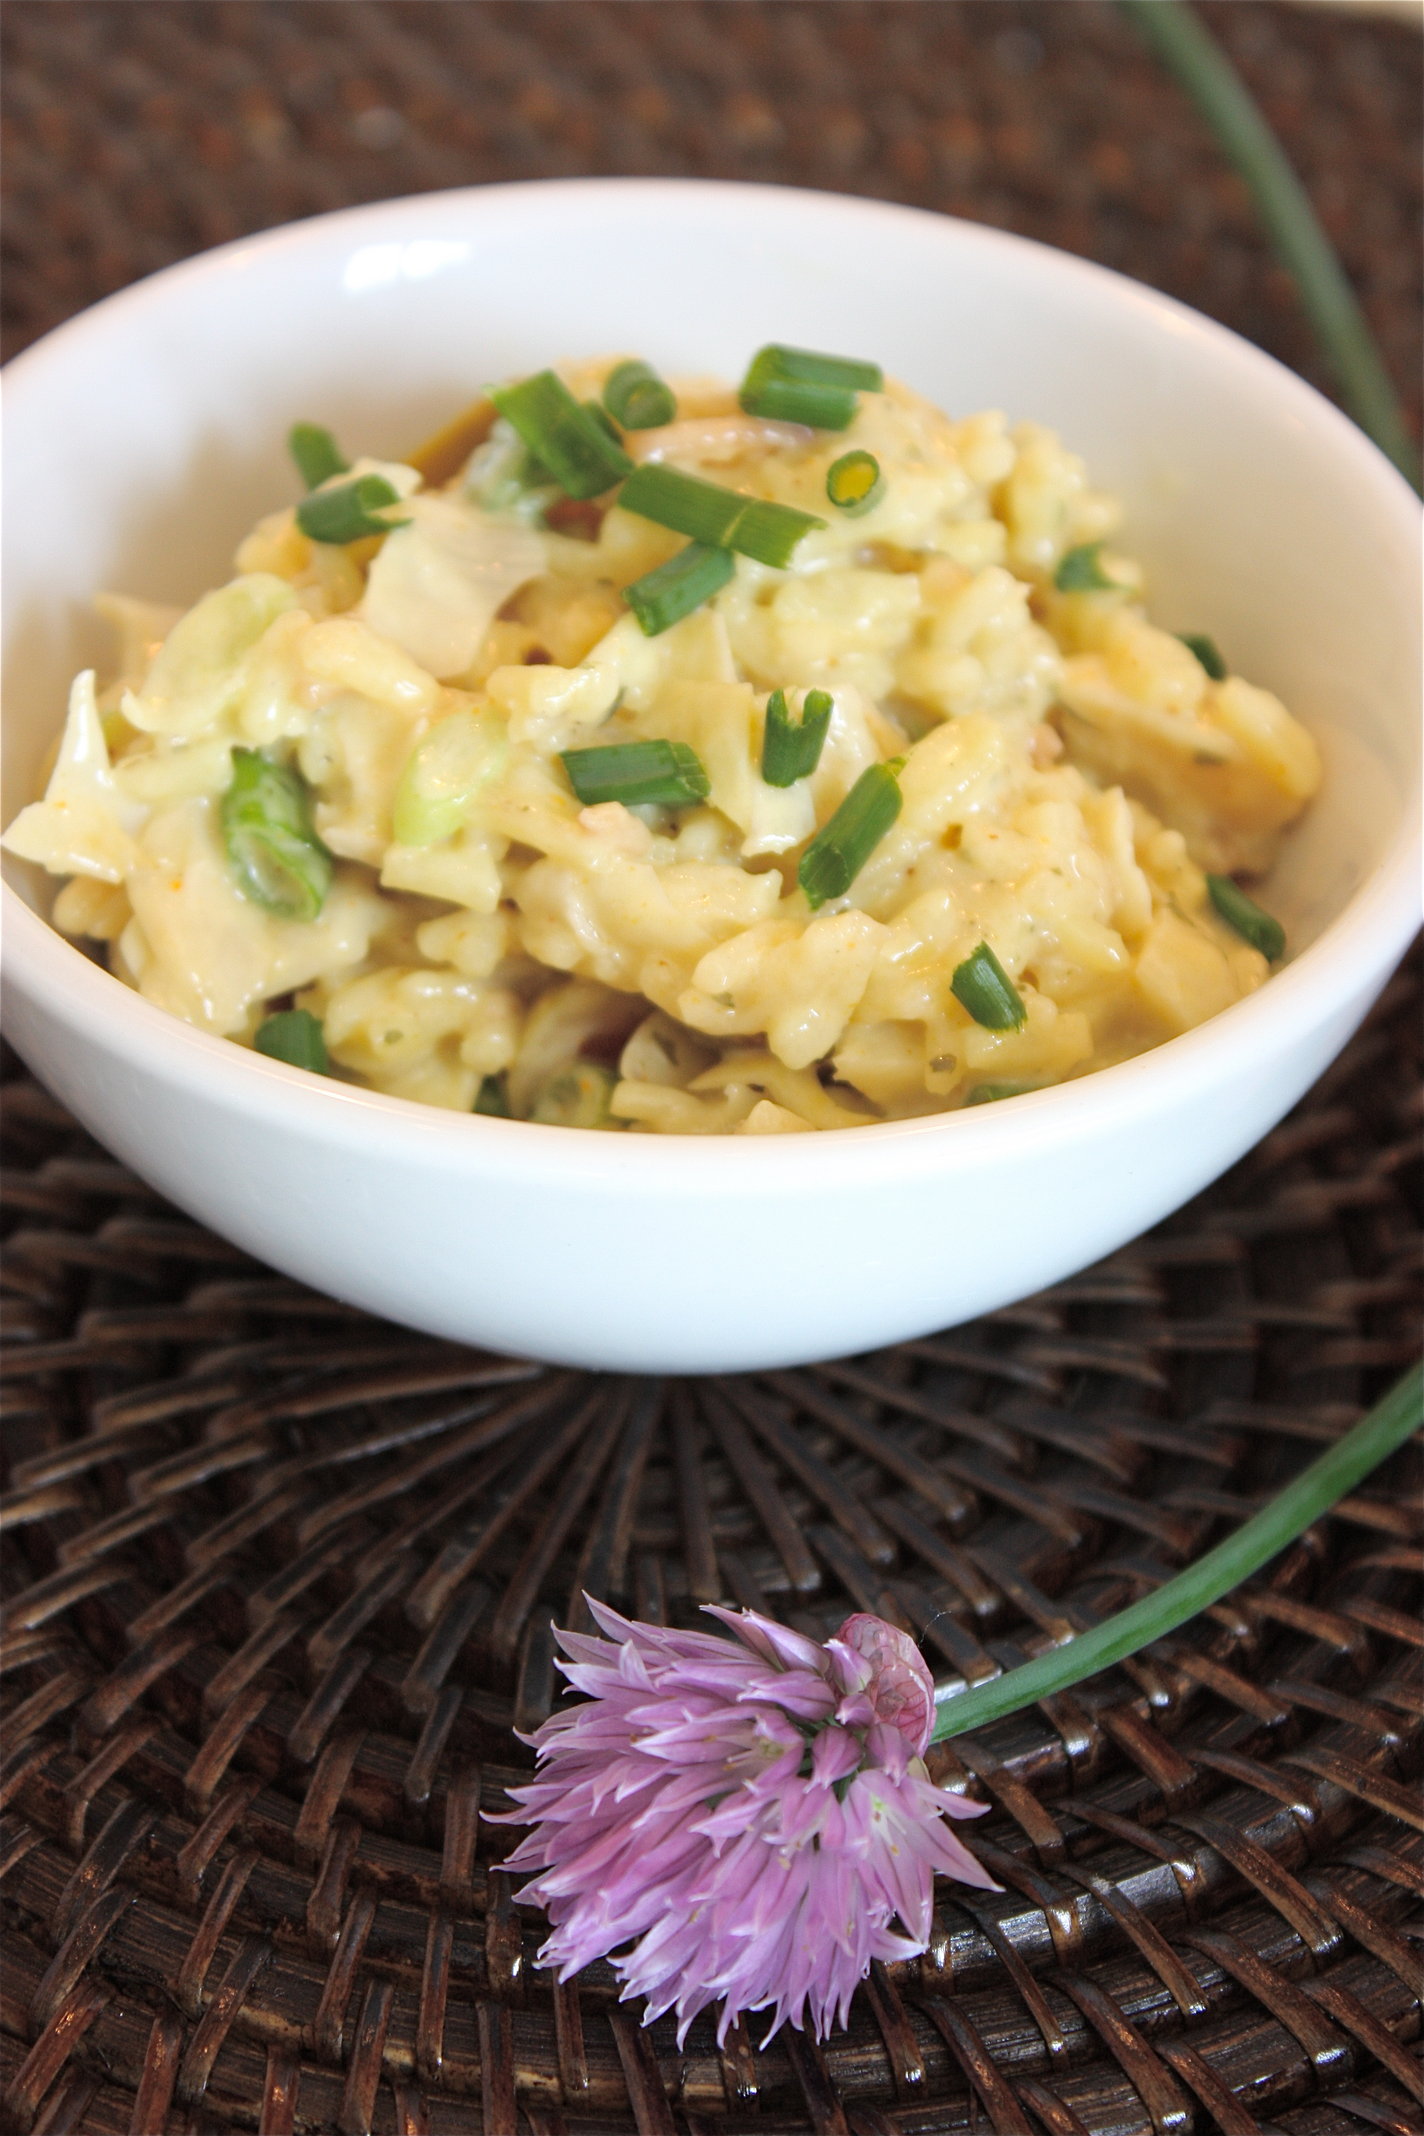 Curried Rice and Artichoke Salad